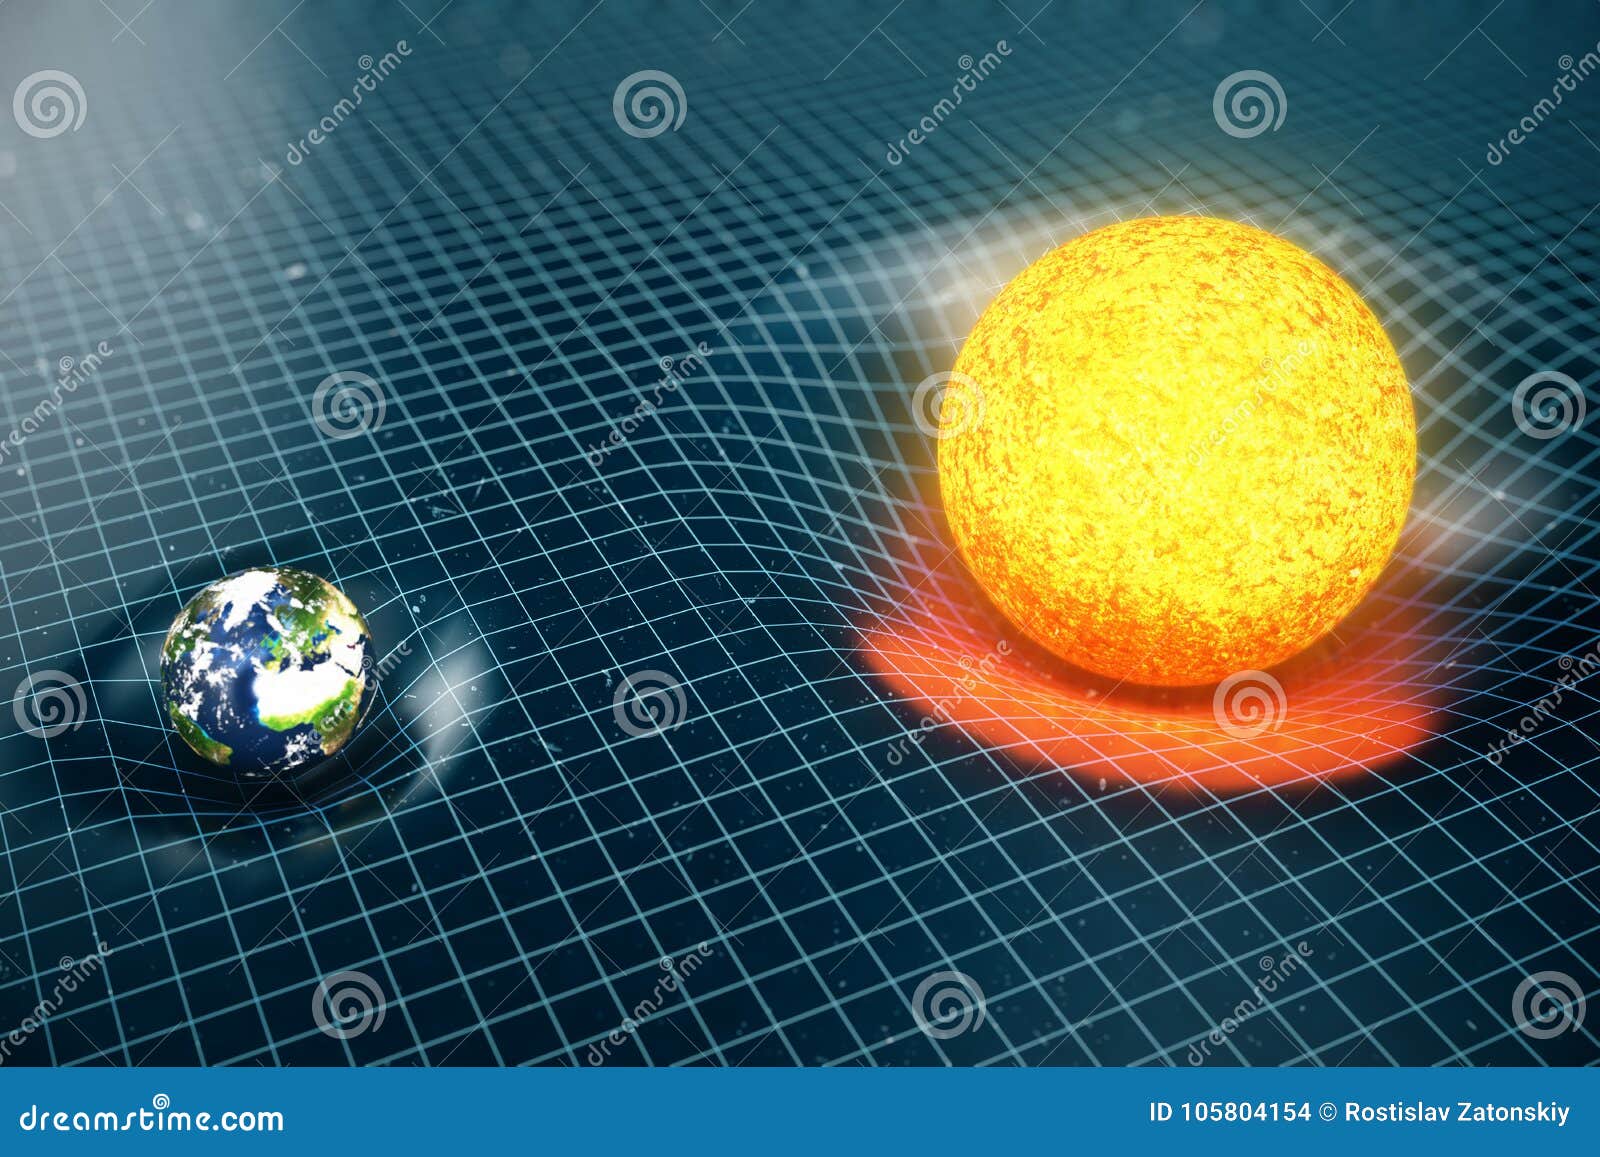 3d  earth`s and sun gravity bends space around it. with bokeh effect. concept gravity deforms space time